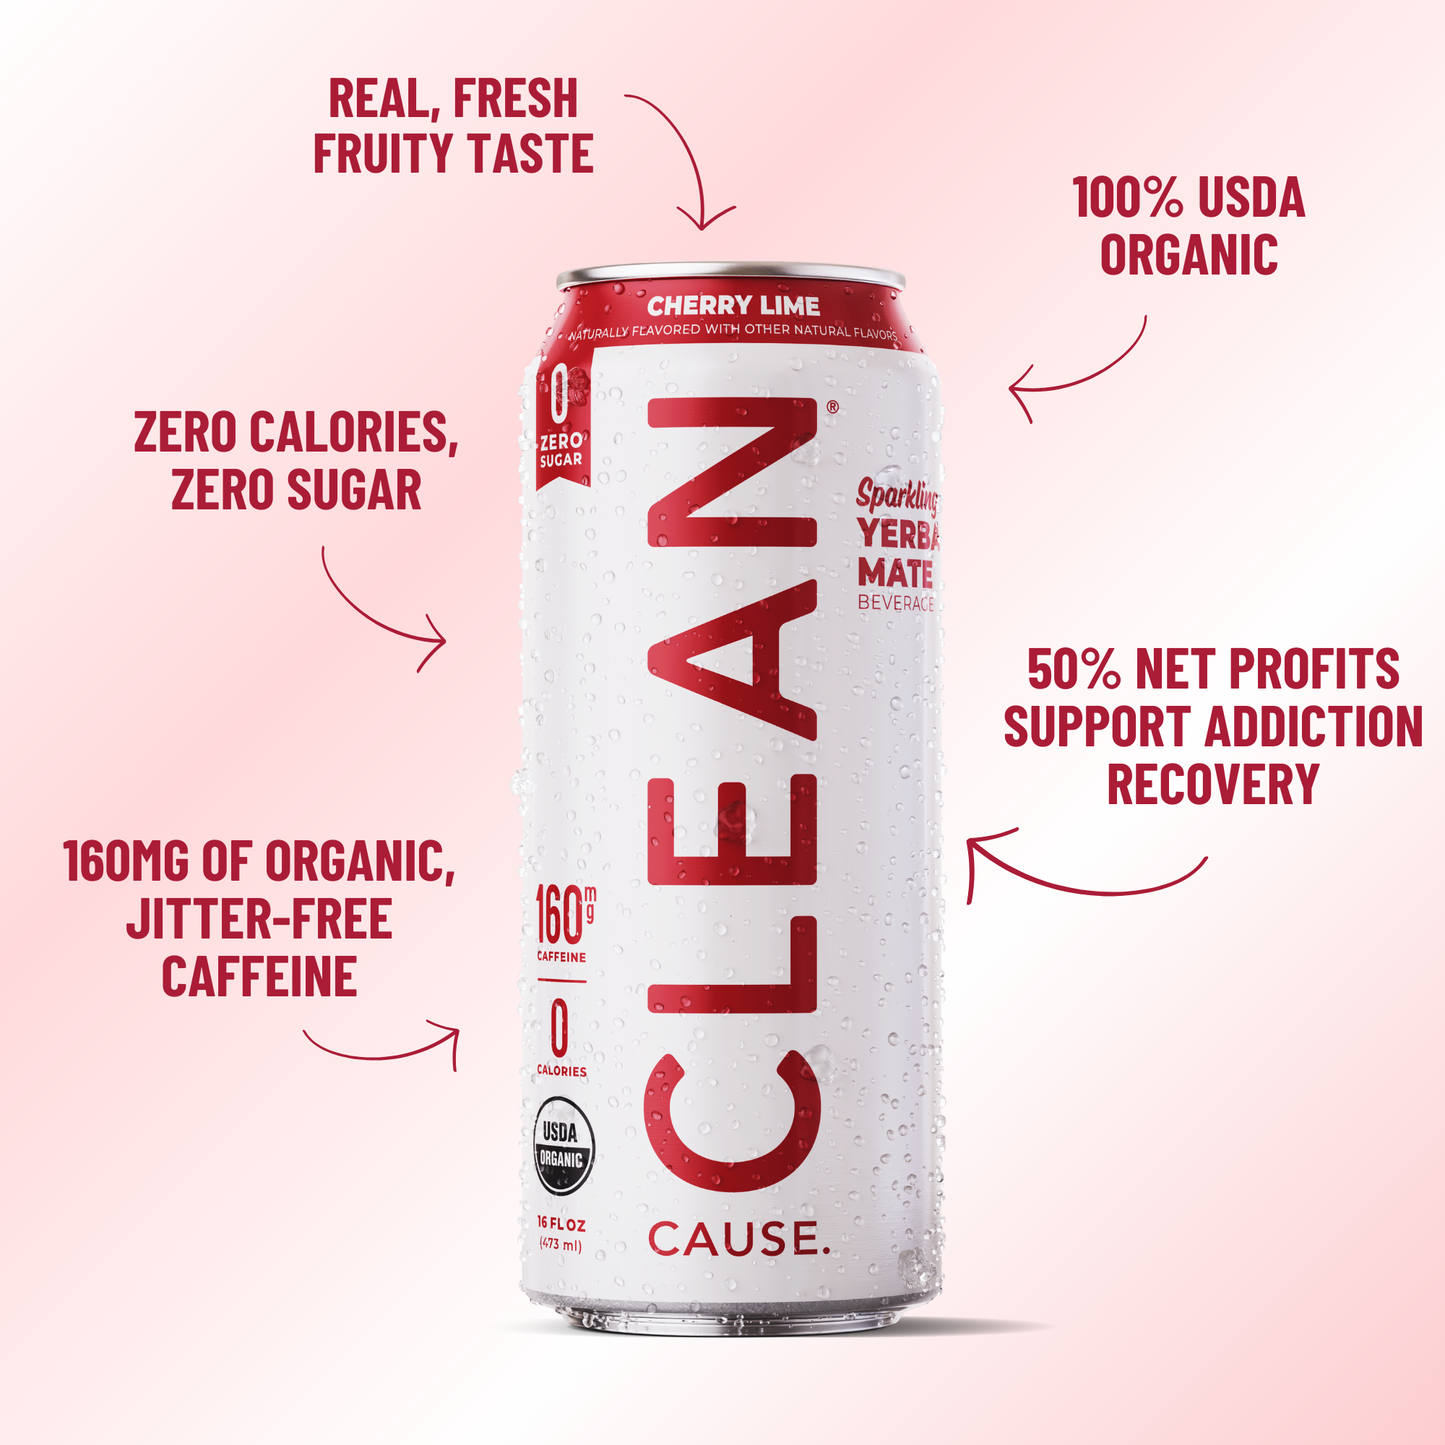 A can of CLEAN Cause Cherry Lime Yerba Mate with little attributes circling it: 160mg of organic jitter-free caffeine, zero calories zero sugar, real fresh fruity taste, 100% USDA organic, 50% net profits support addiction recovery